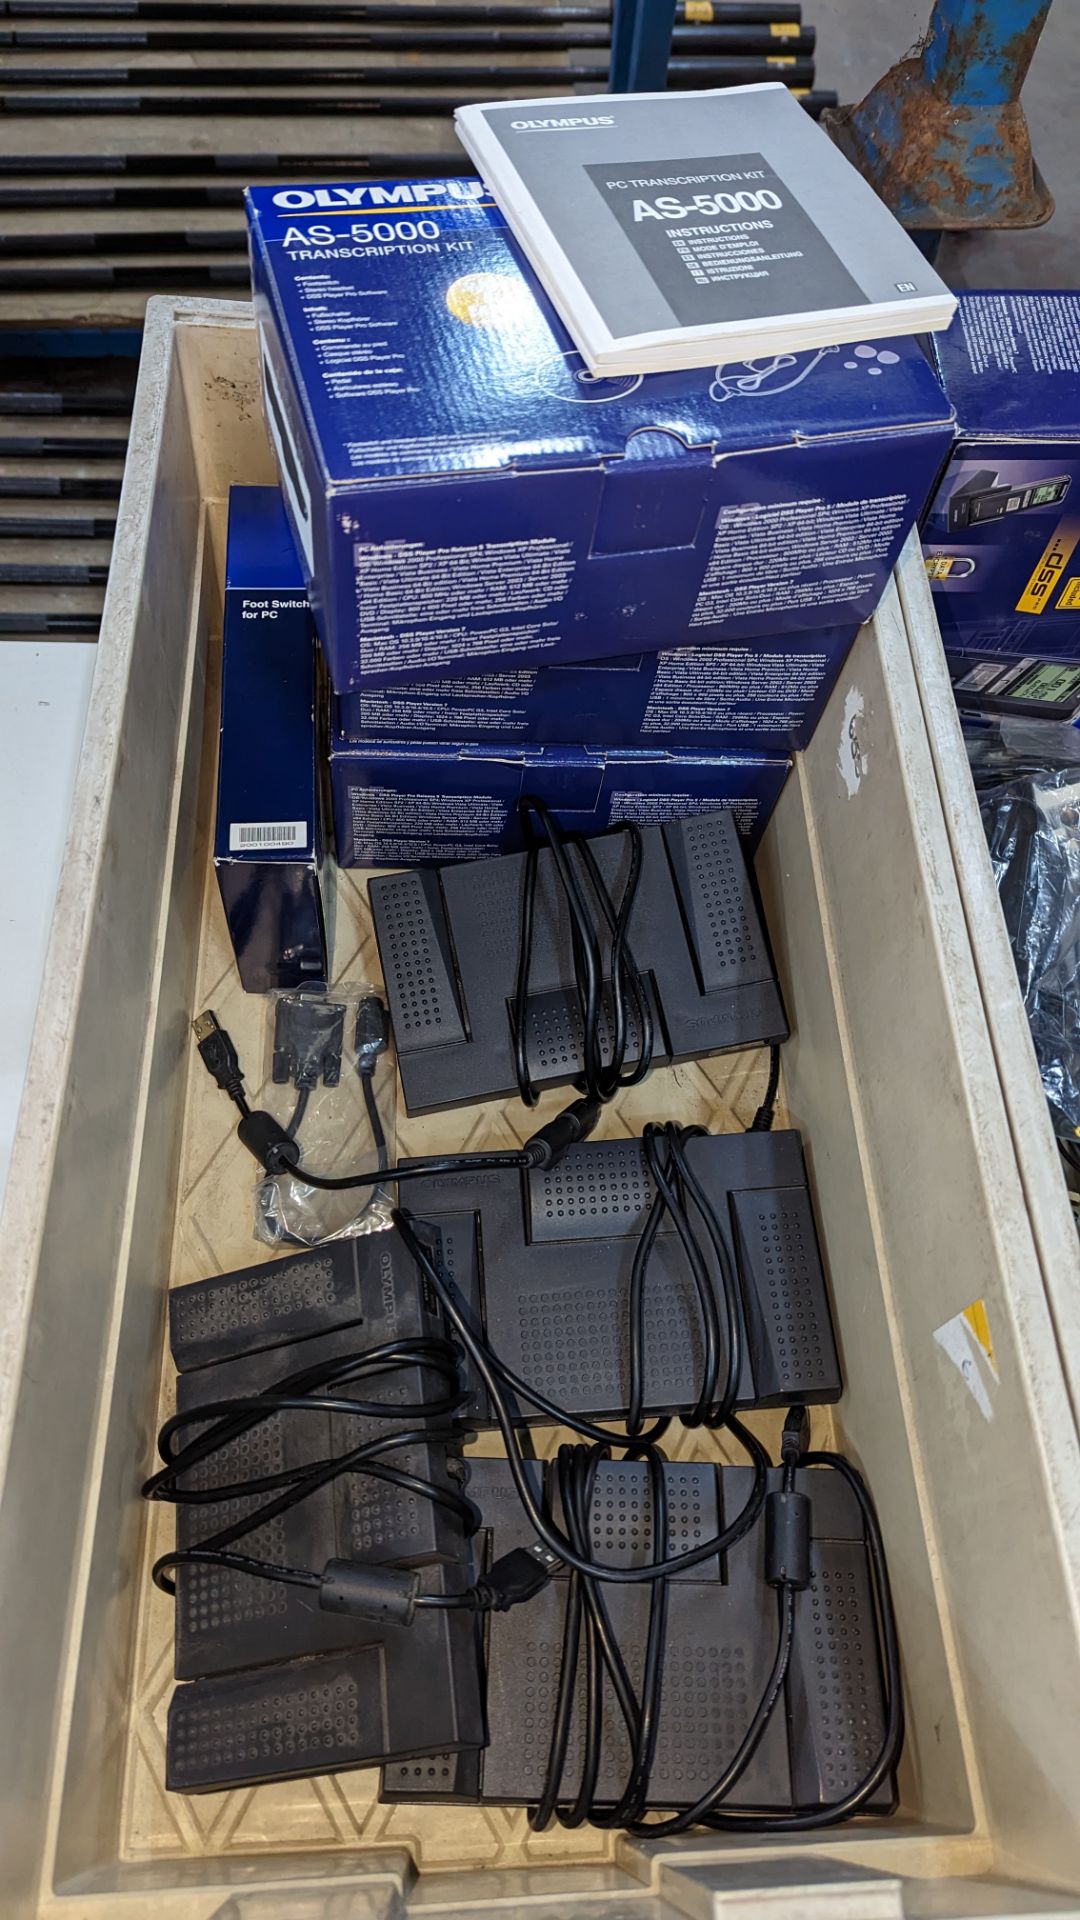 Olympus Pro dictation equipment - this lot includes four foot pedals plus a quantity of boxes, cable